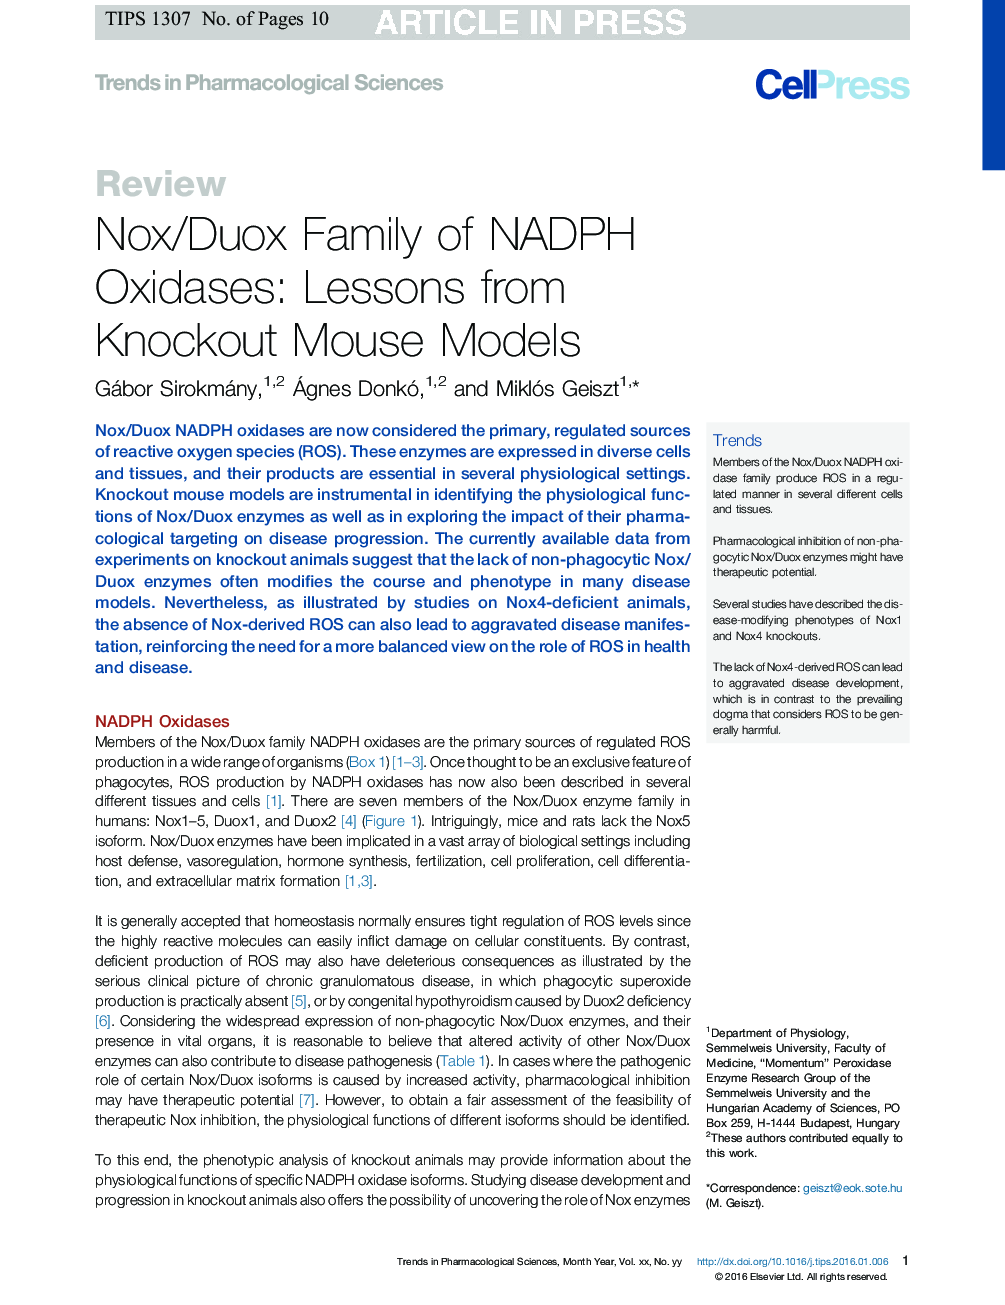 Nox/Duox Family of NADPH Oxidases: Lessons from Knockout Mouse Models